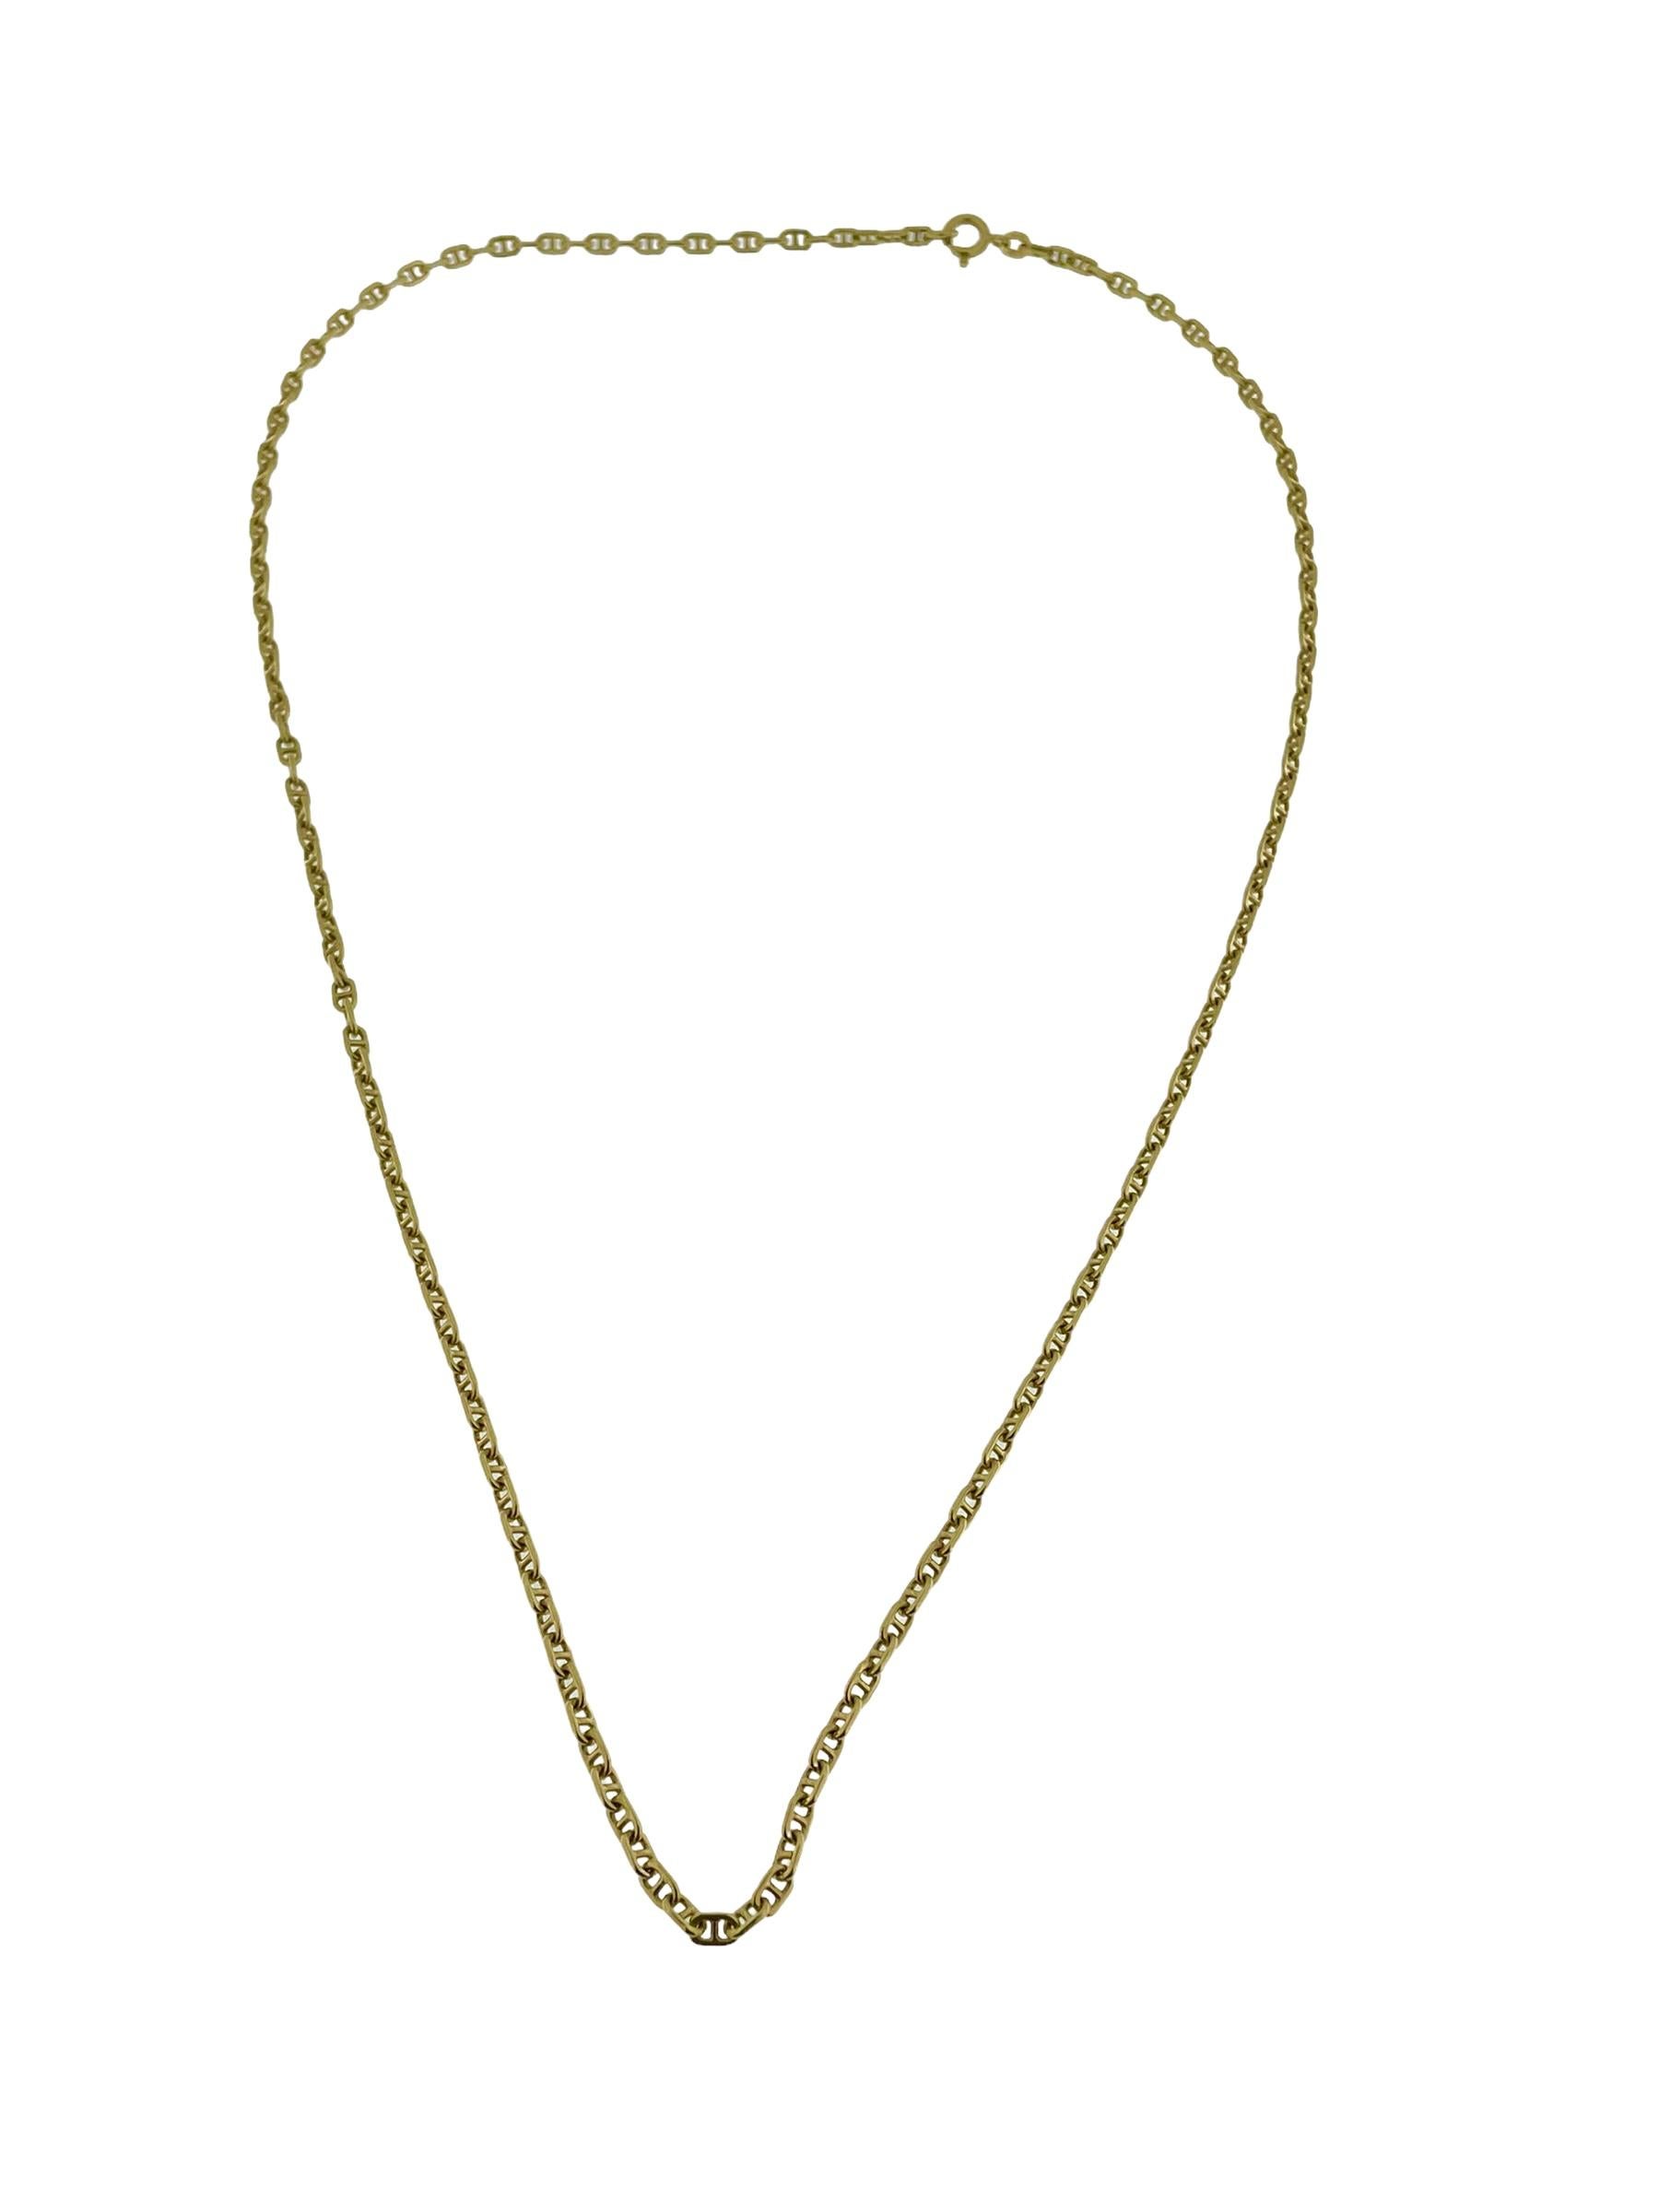 This Italian Mariner Link Chain crafted in radiant 18kt yellow gold by Balestra is a testament to both exquisite craftsmanship and timeless elegance. The Mariner link, characterized by its interlocking oval links with a bar through the center,